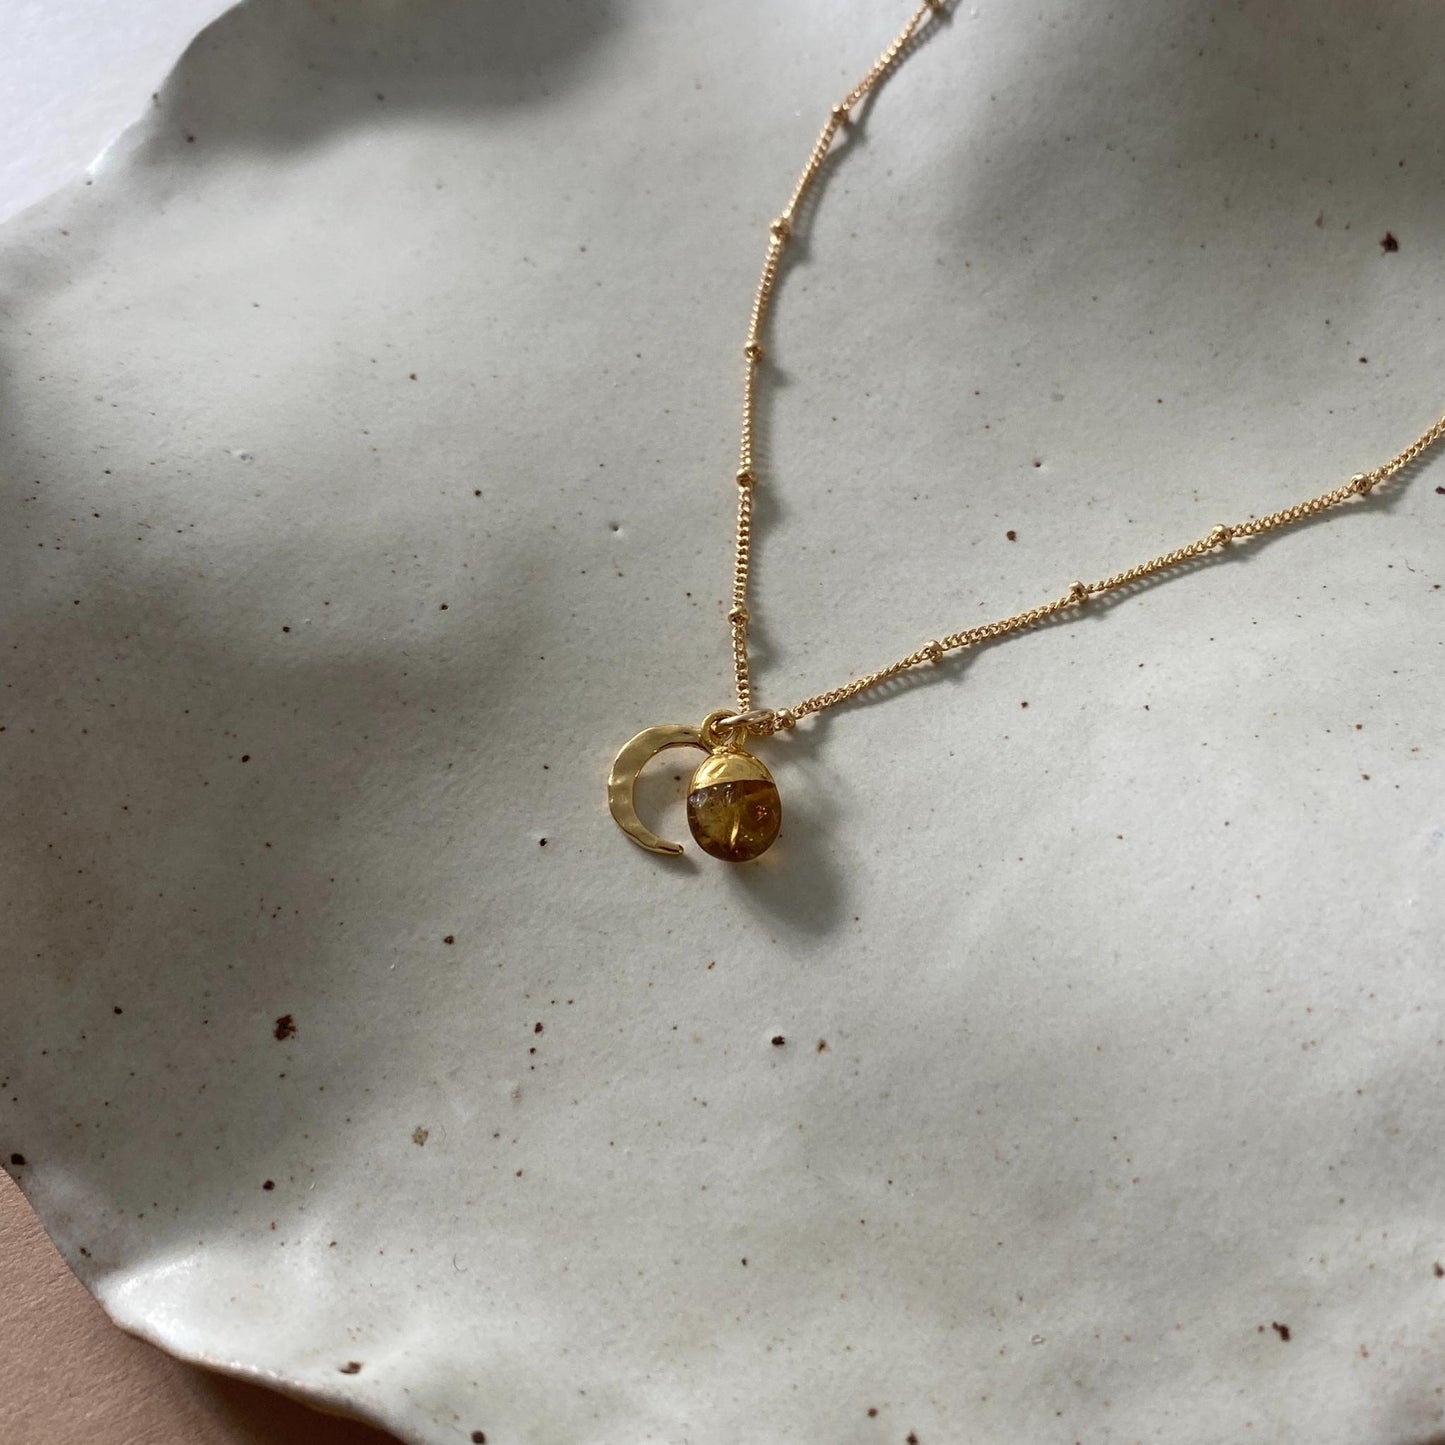 Create Your Own | Tumbled Gemstone & Moon Necklace (Gold Plated)